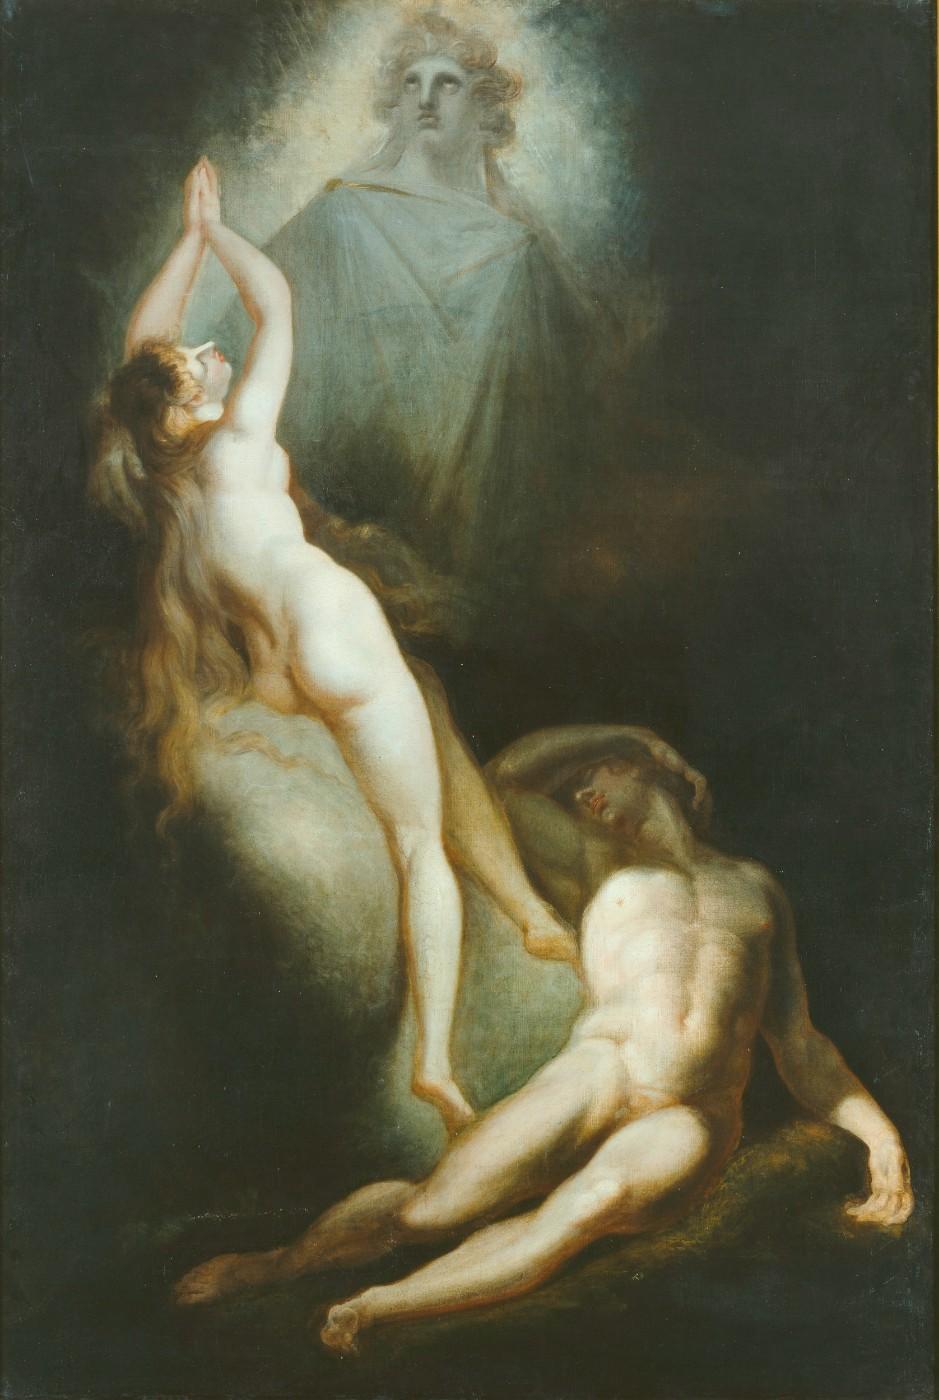 The Creation of Eve